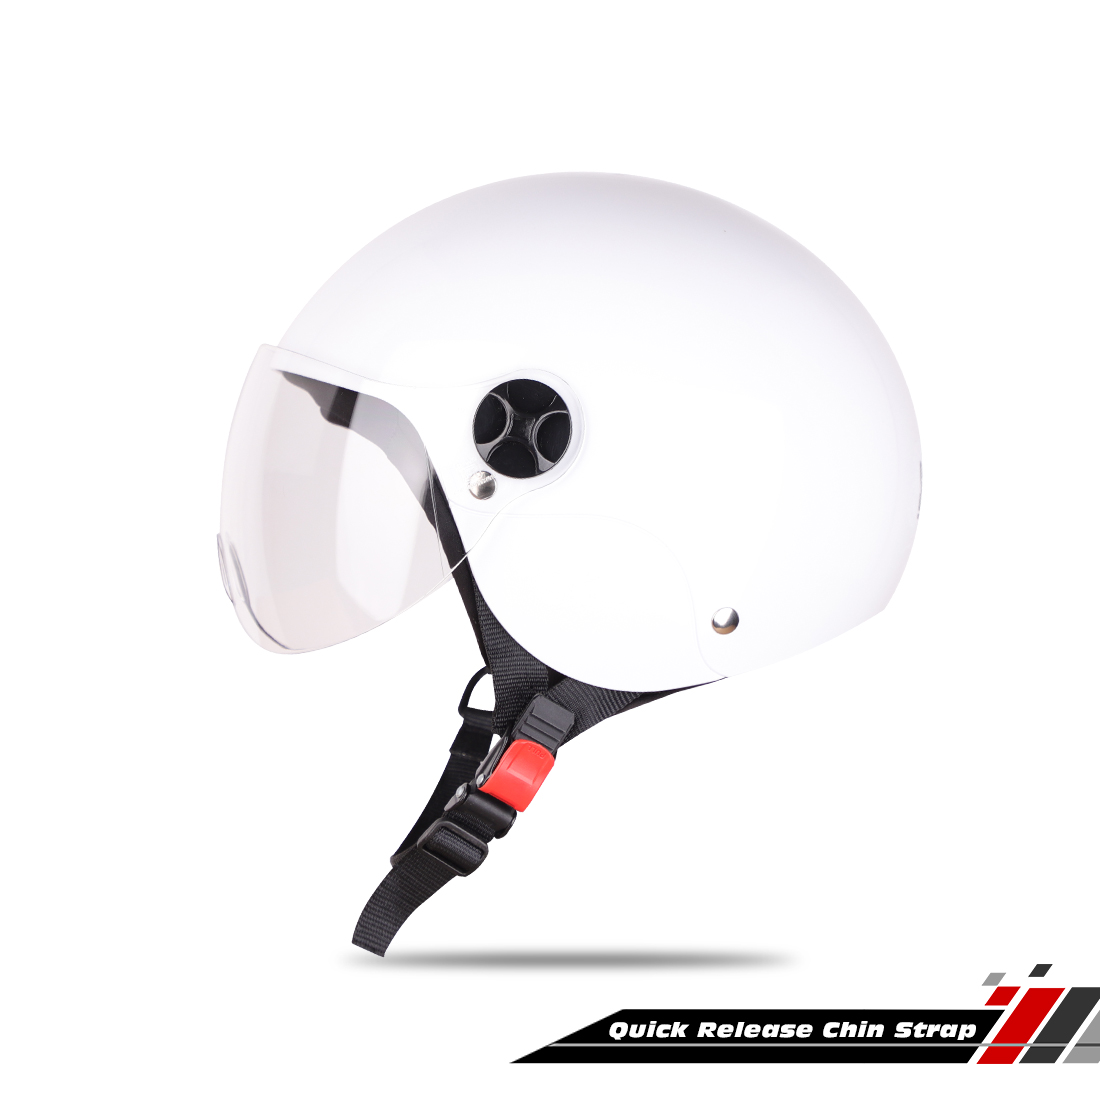 Steelbird SBH-16 Dex ISI Certified Open Face Helmet (Glossy White With Clear Visor)